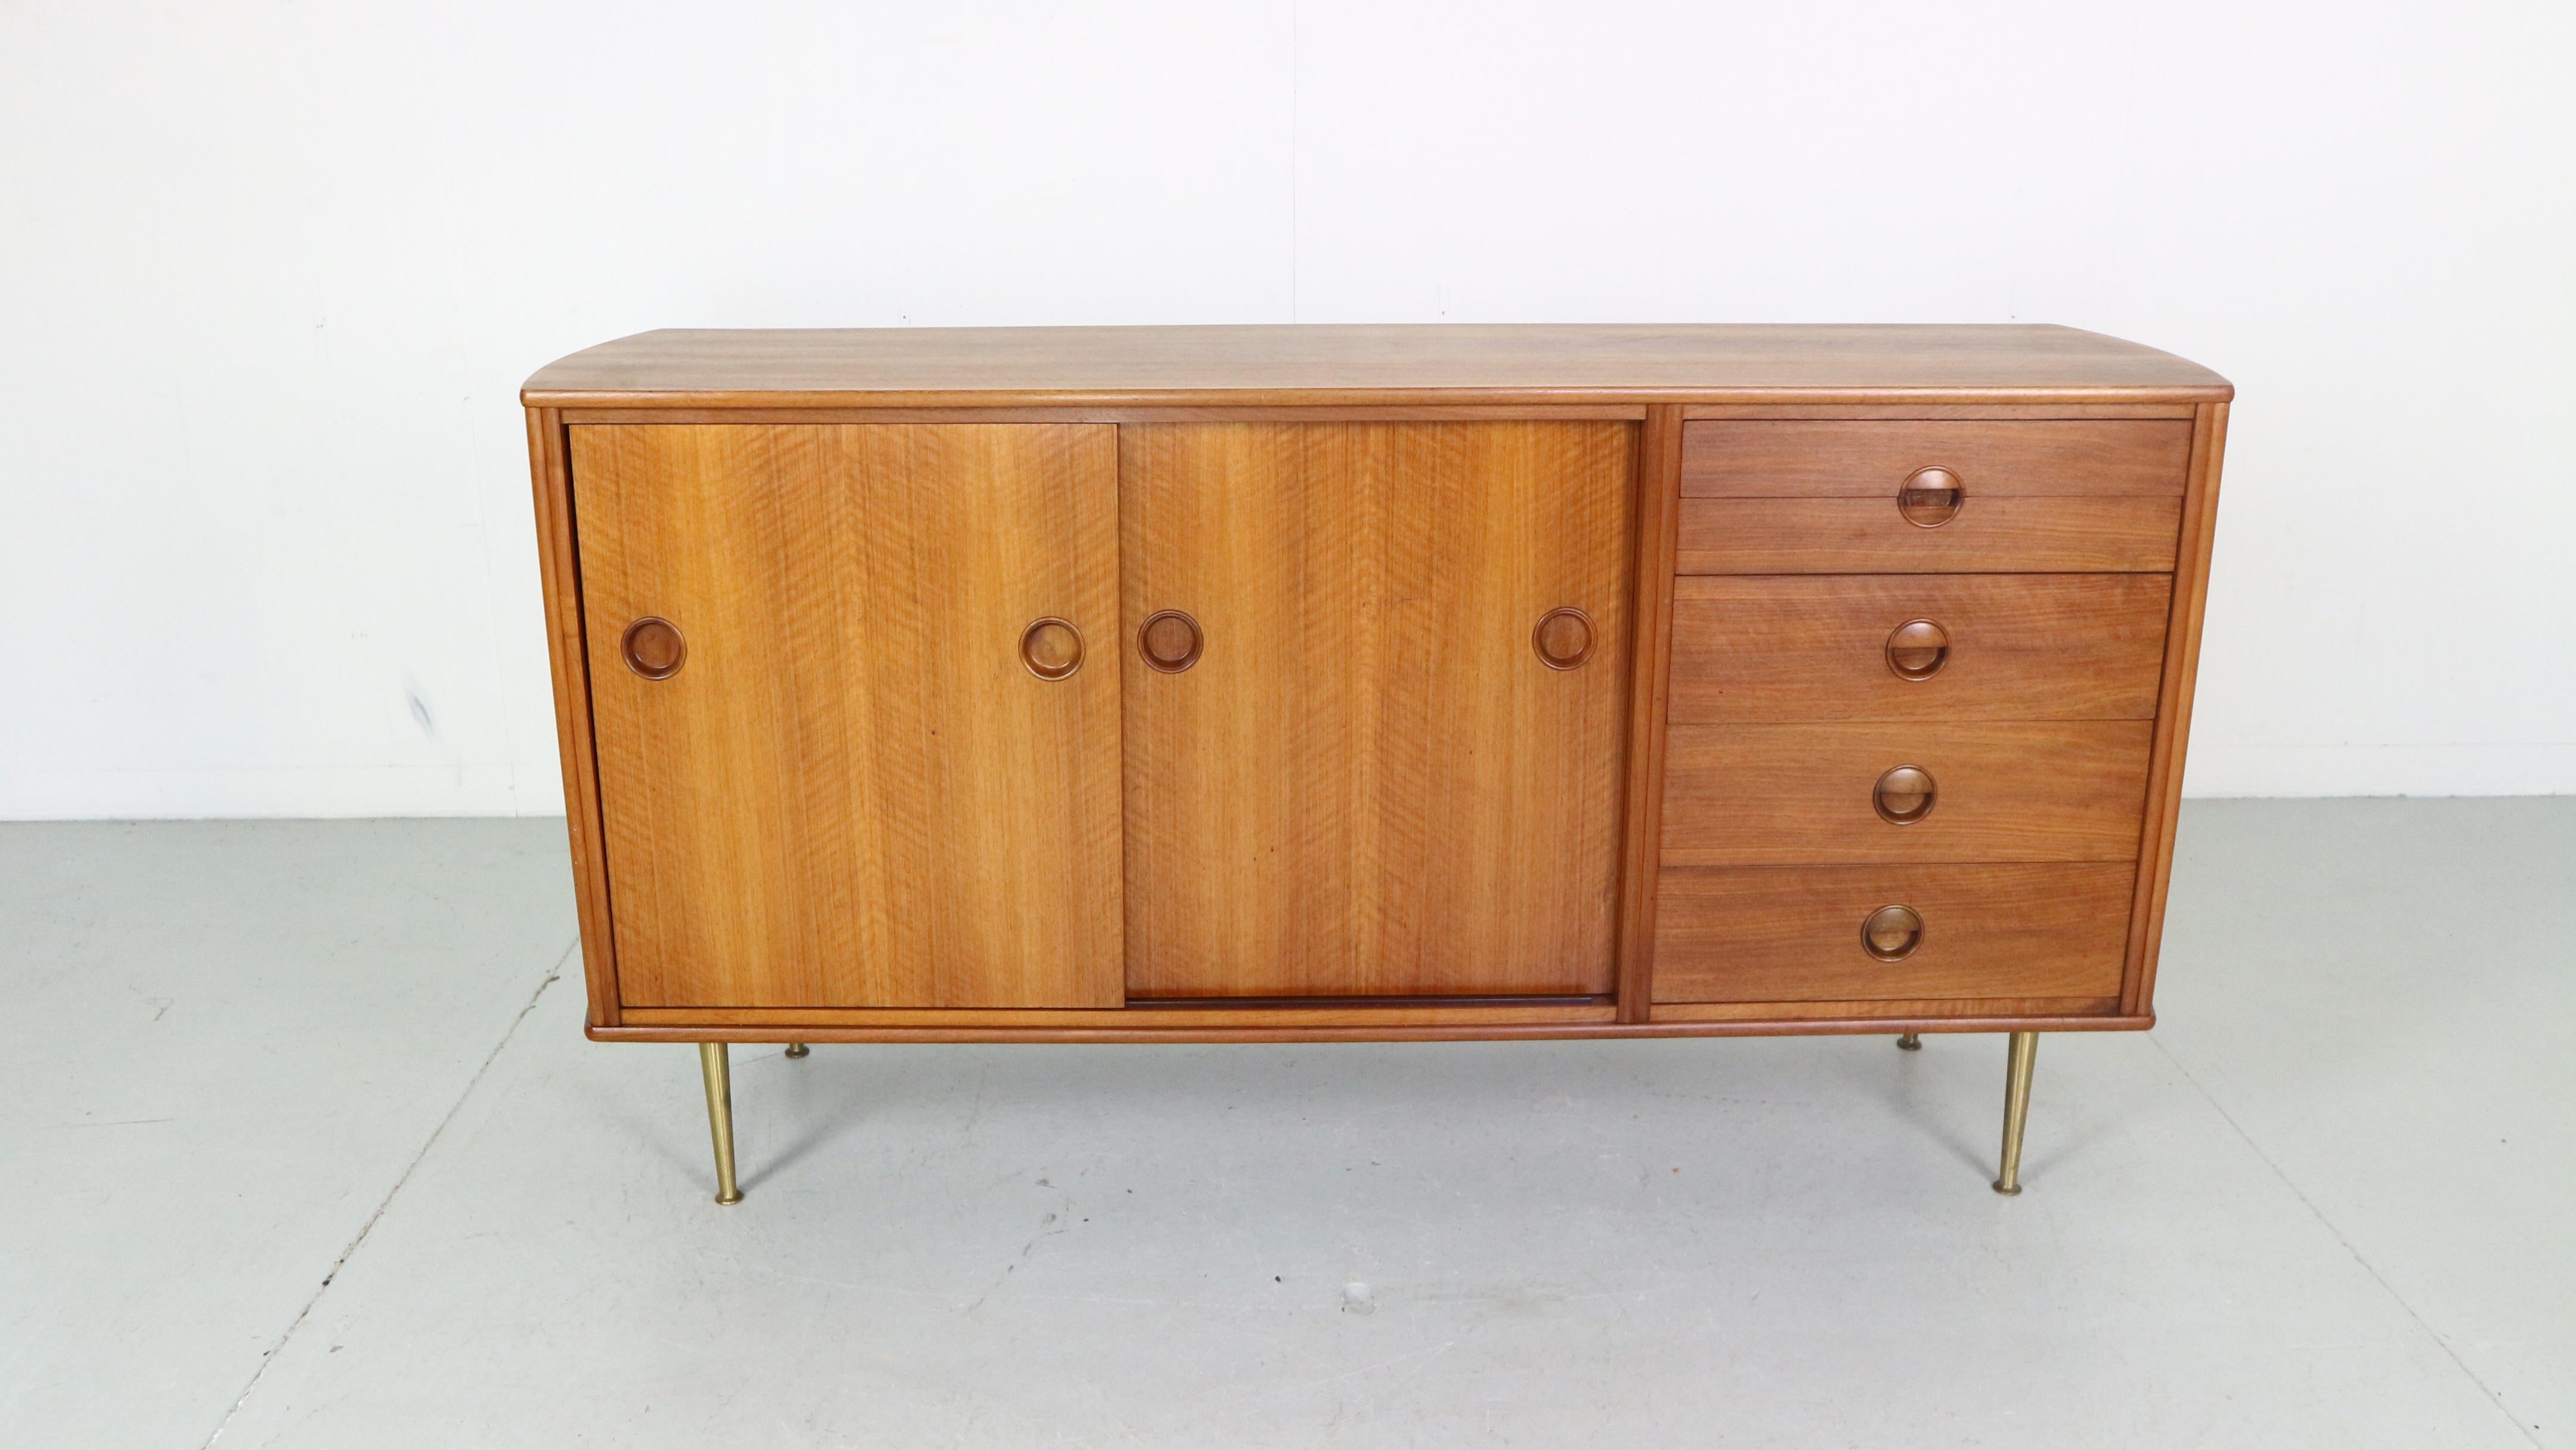 Fantastic Fristho walnut sideboard, designed by the Danish William Watting in 1955. He started the Scandinavian influence at Fristho Franeker with his 'Modern Art' collection, where this sideboard is part of. His designs were in production till 1961